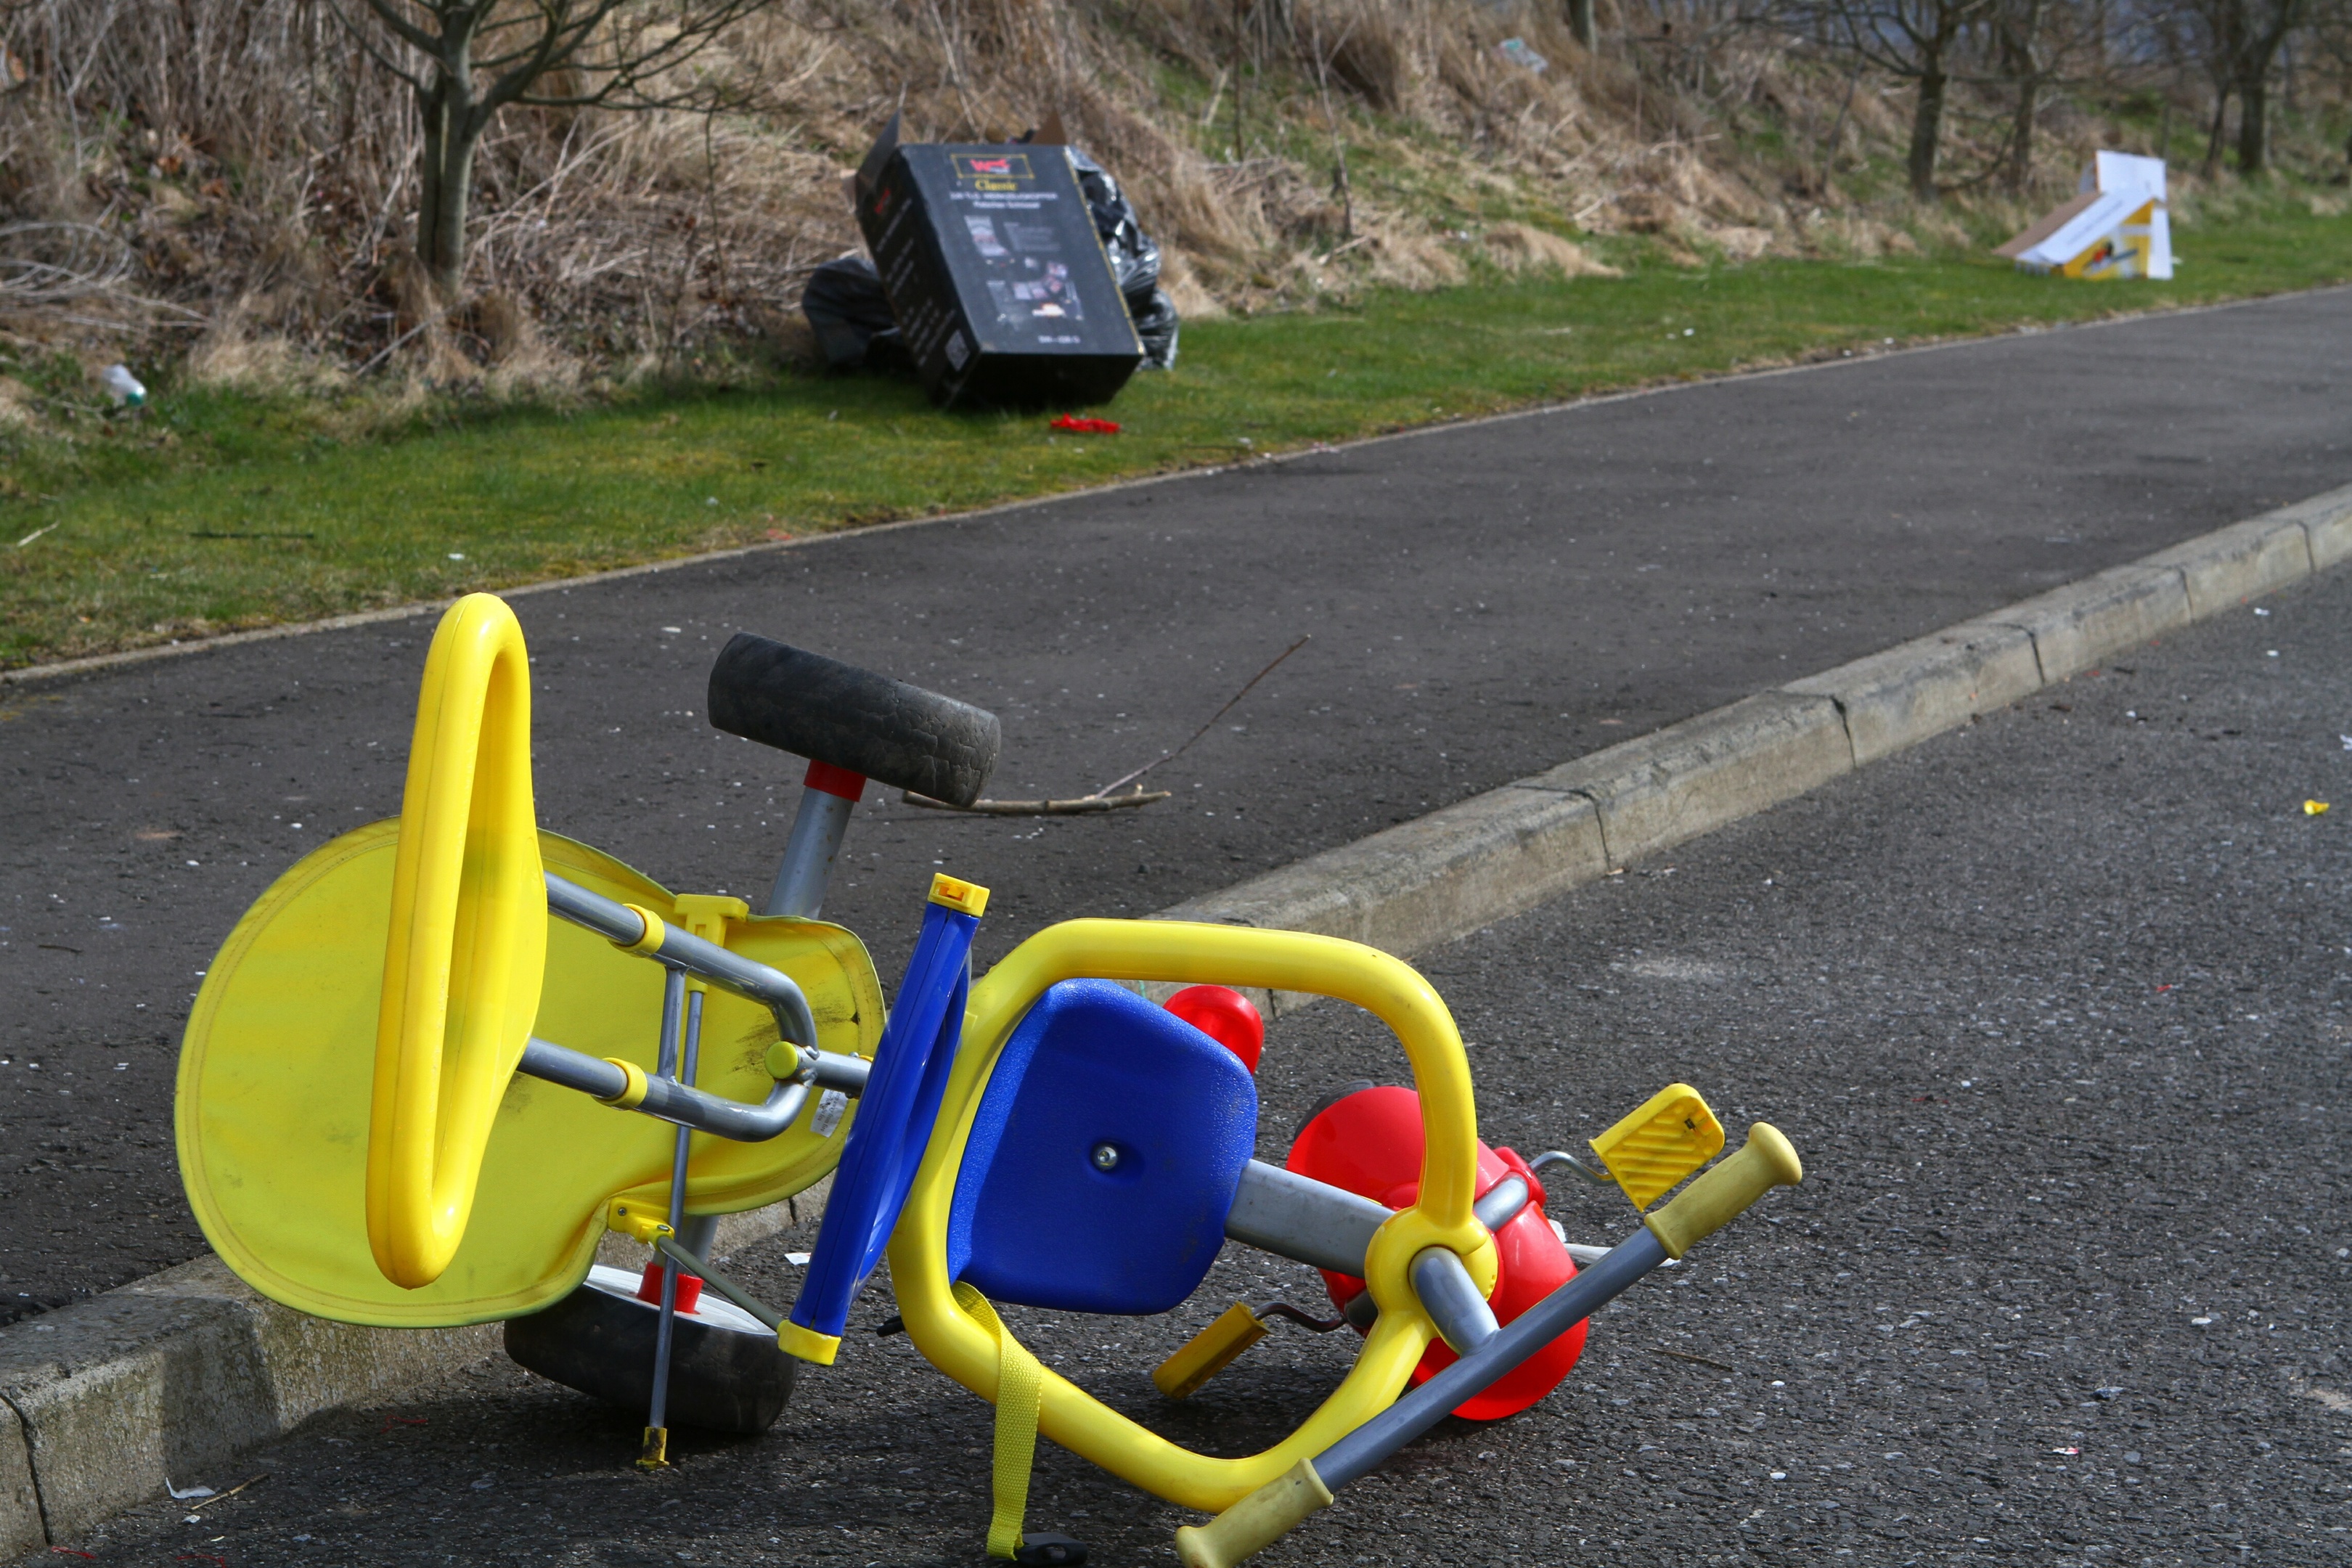 A child's toy was among the rubbish left at Broxden Park and Ride.